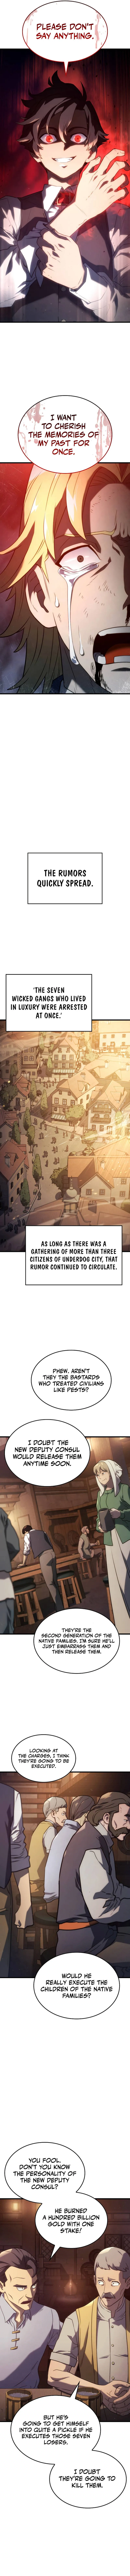 Revenge of the Iron-Blooded Sword Hound Chapter 20 page 7